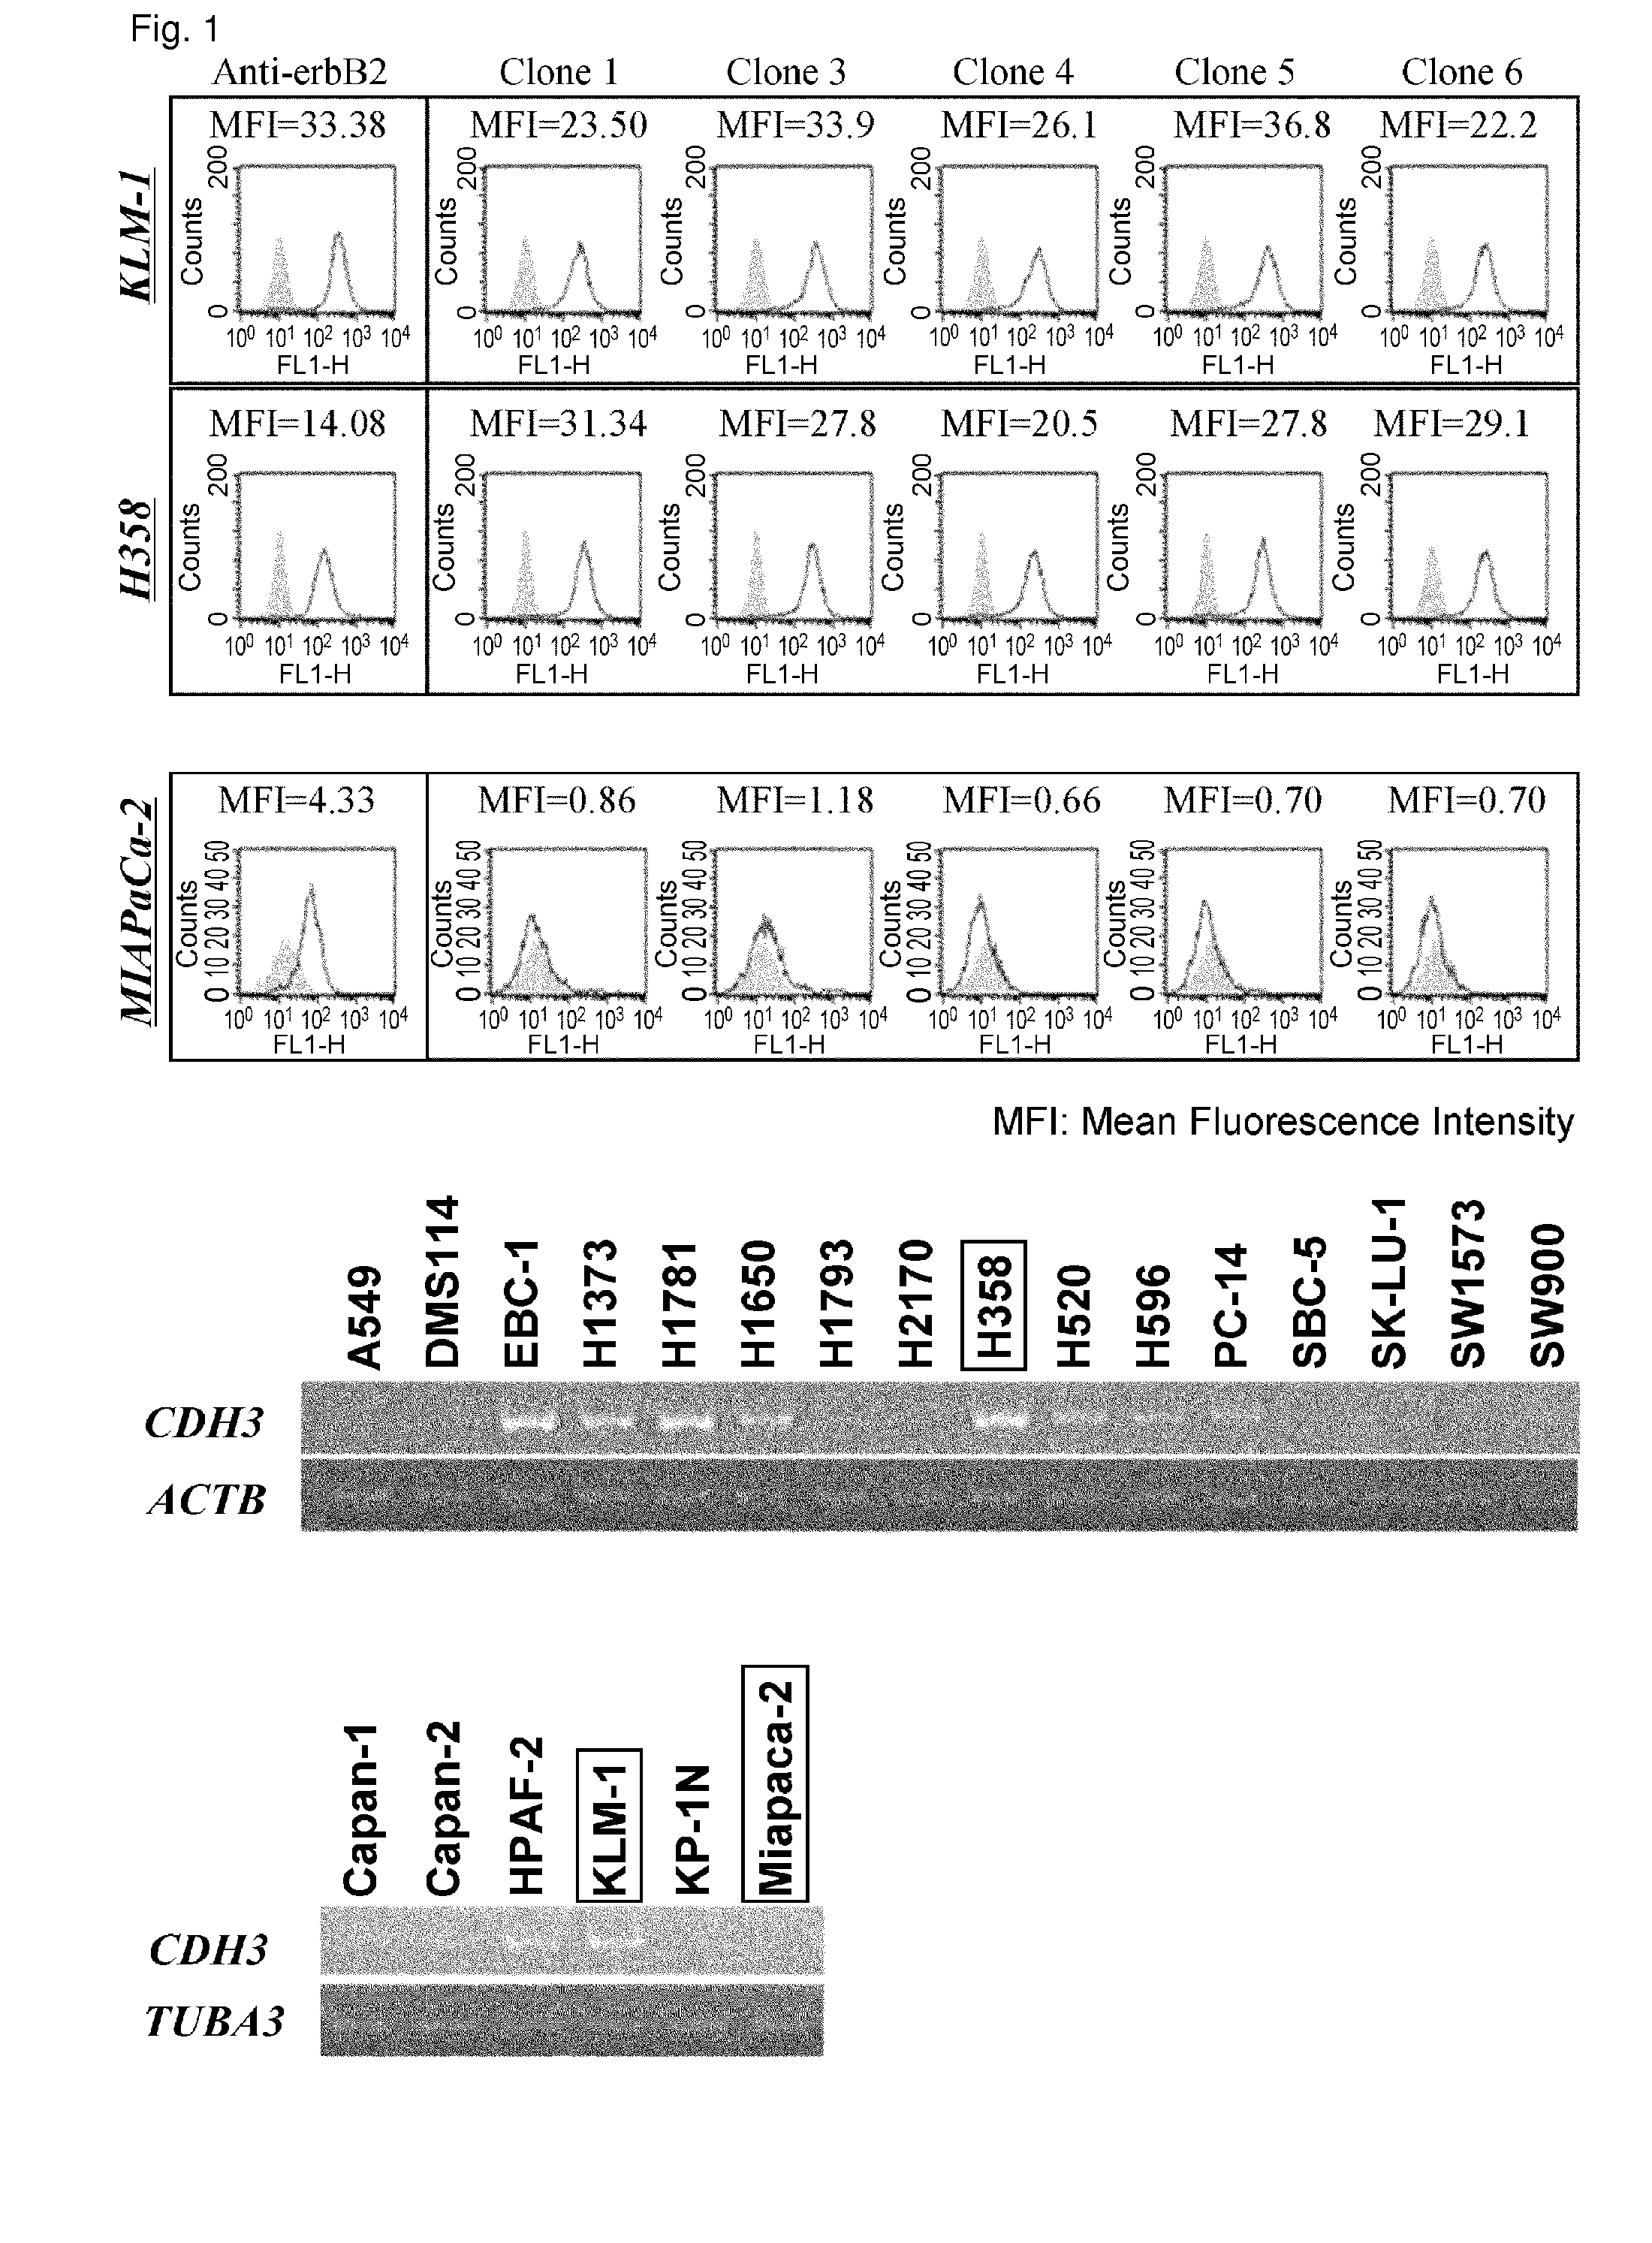 Anti-CDH3 antibodies labeled with radioisotope label and uses thereof